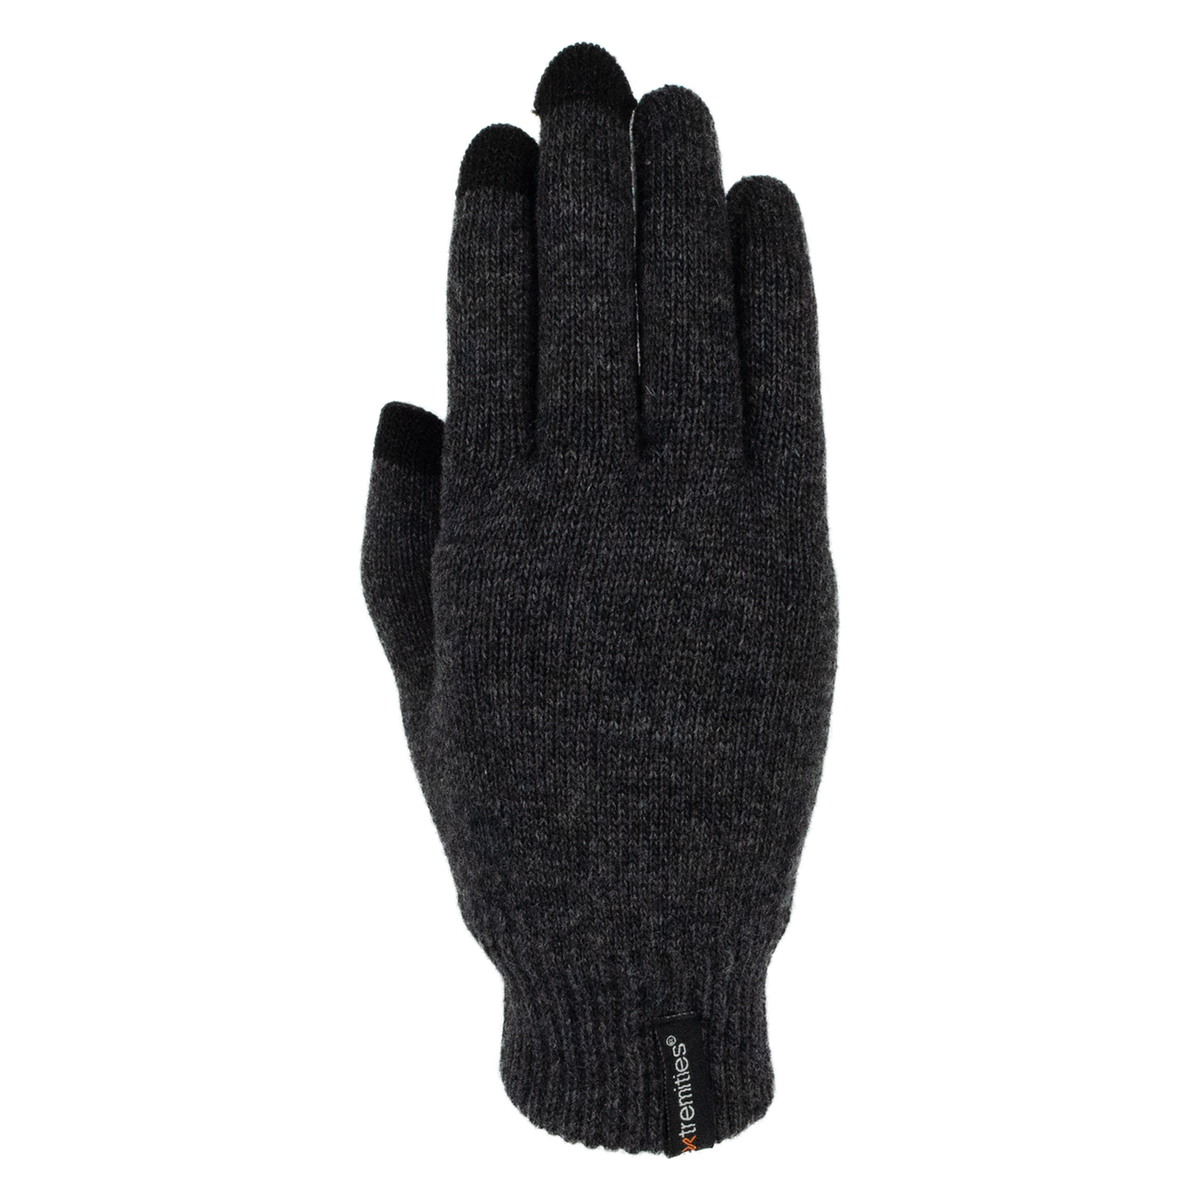 Extremities Thinny Touch Glove - Charcoal - One Size